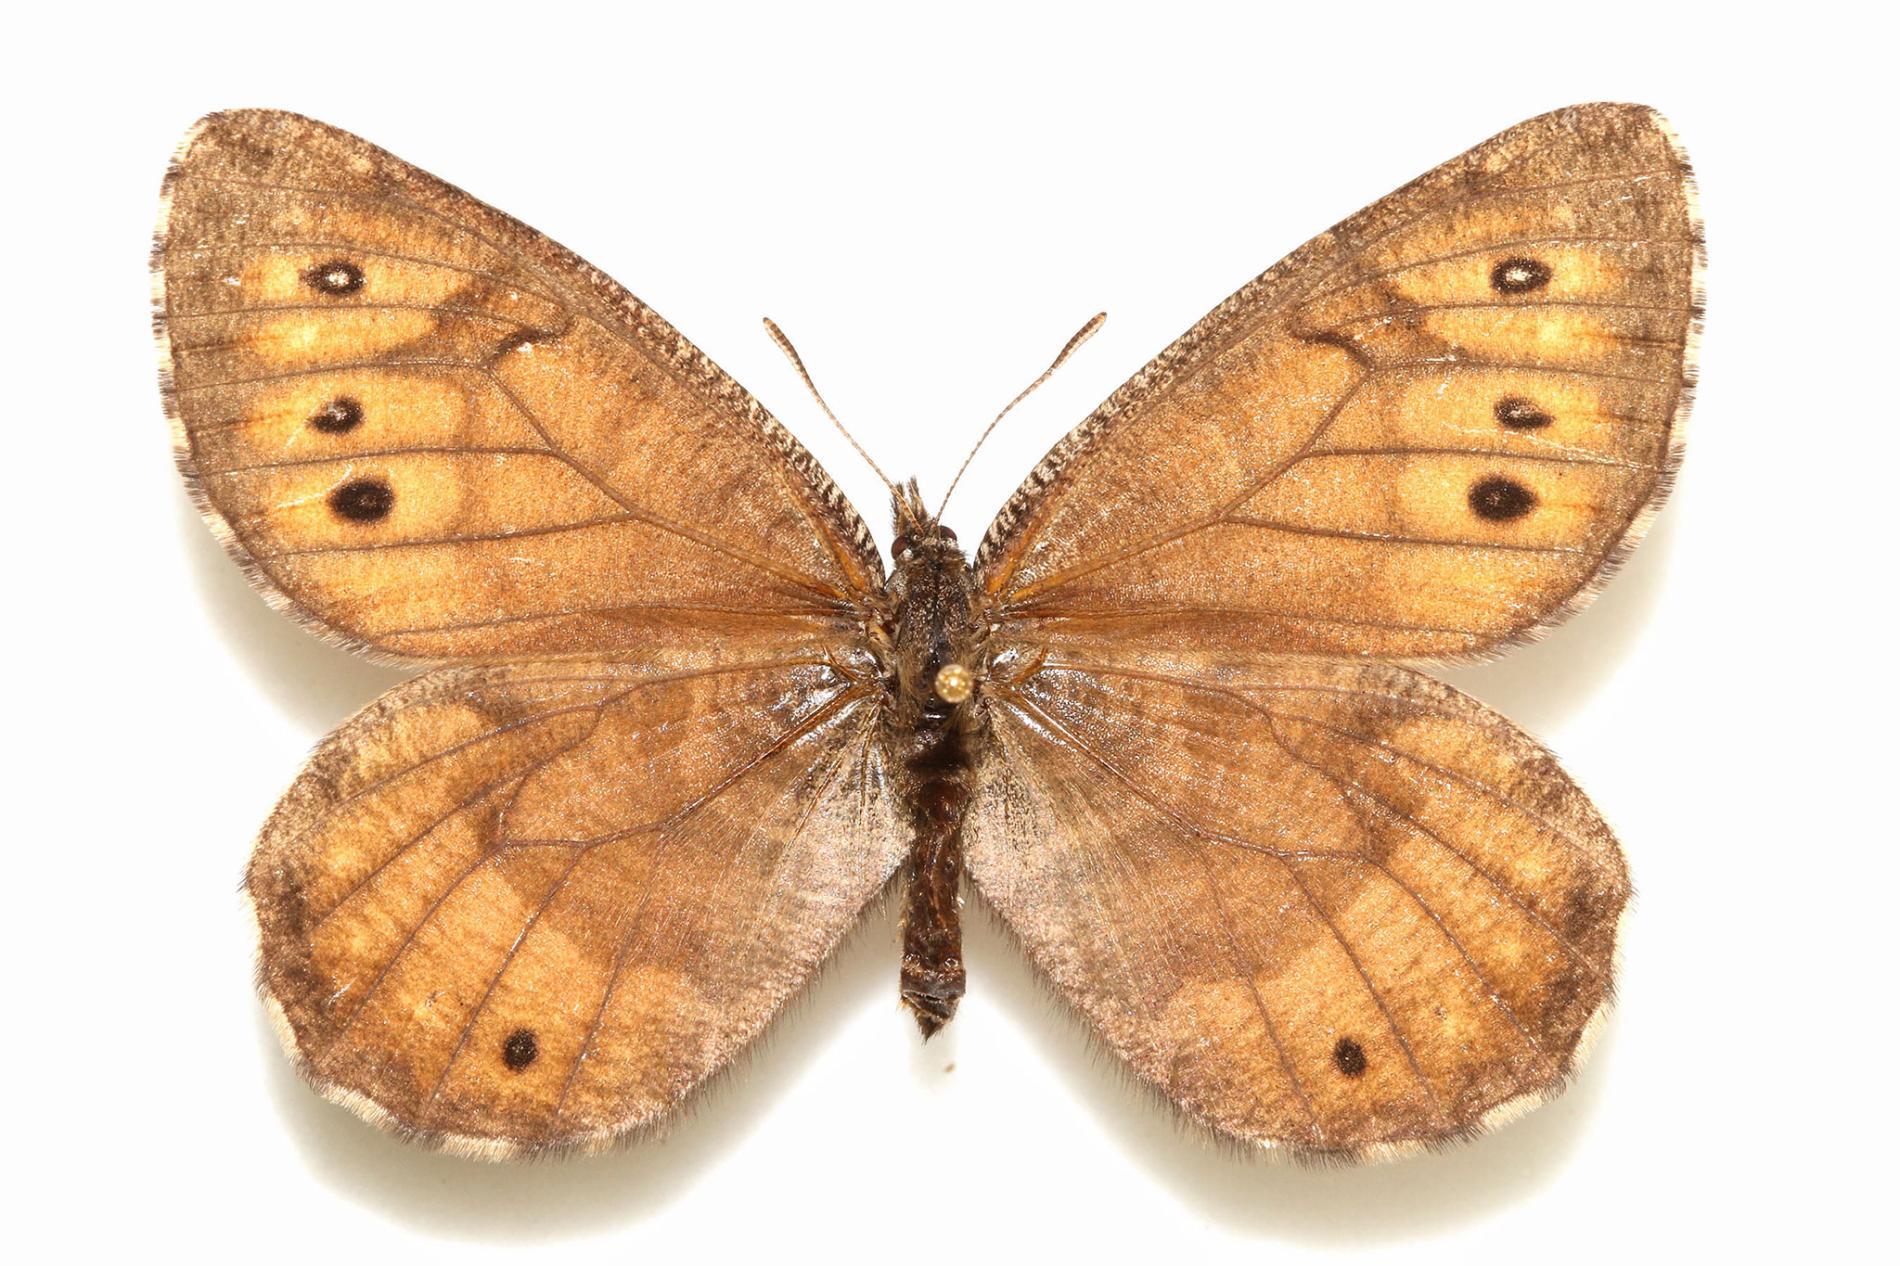 New Butterfly Discovered in Alaska for First Time in 28 Years